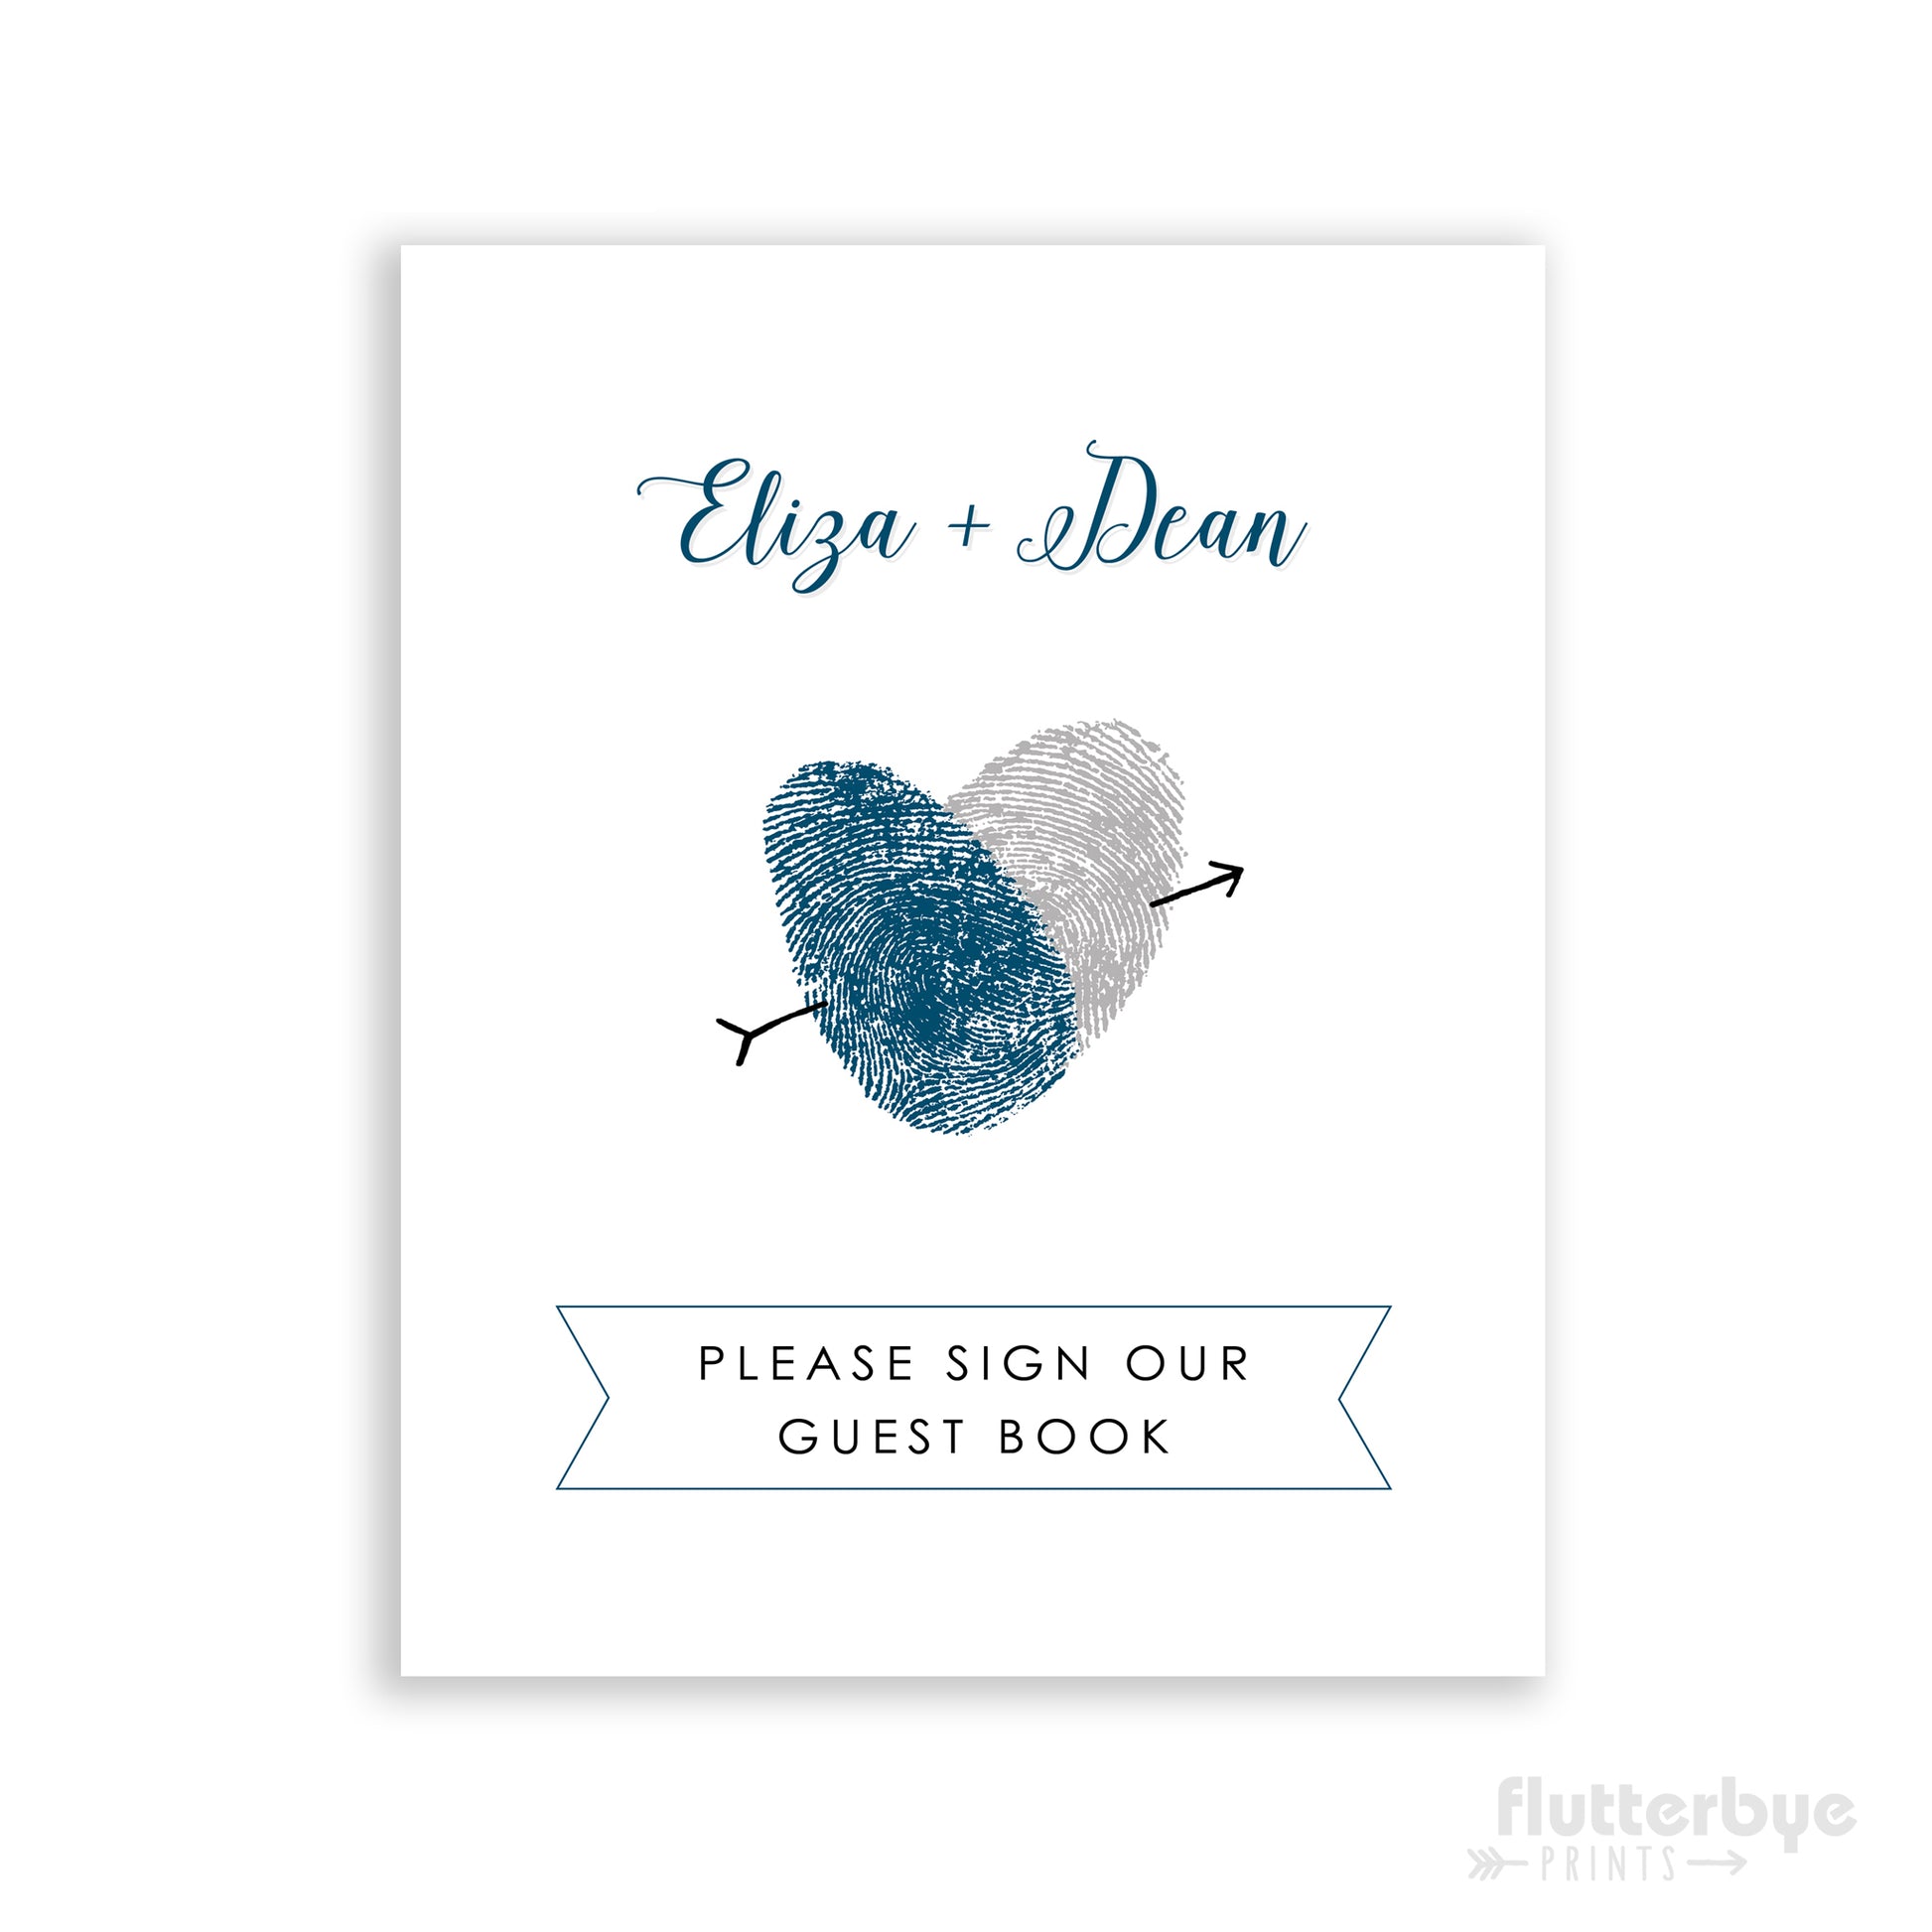 8x10 guestbook guest sign in reception decor